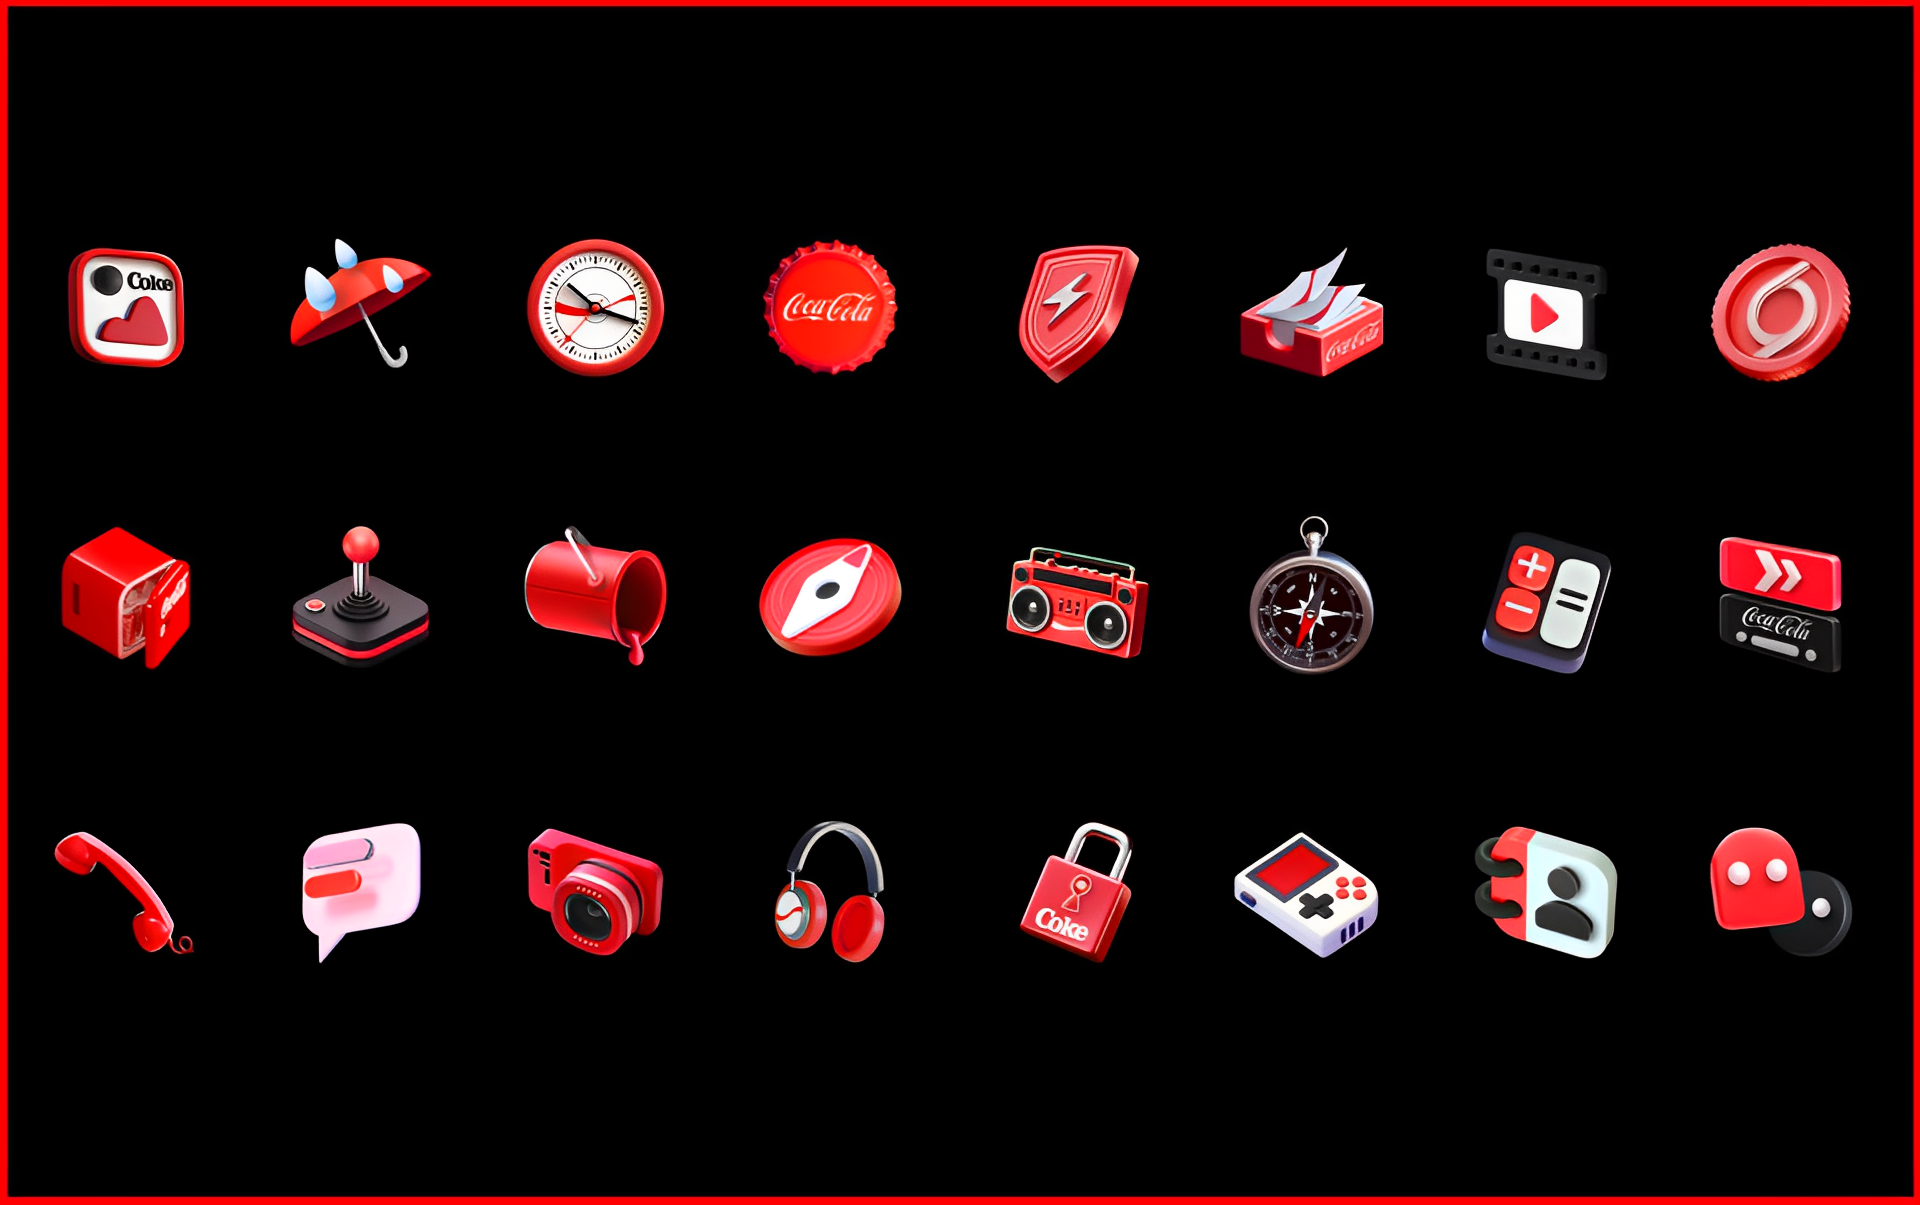 Default icons in the Coke Phone are mixed with Coca-Cola themes